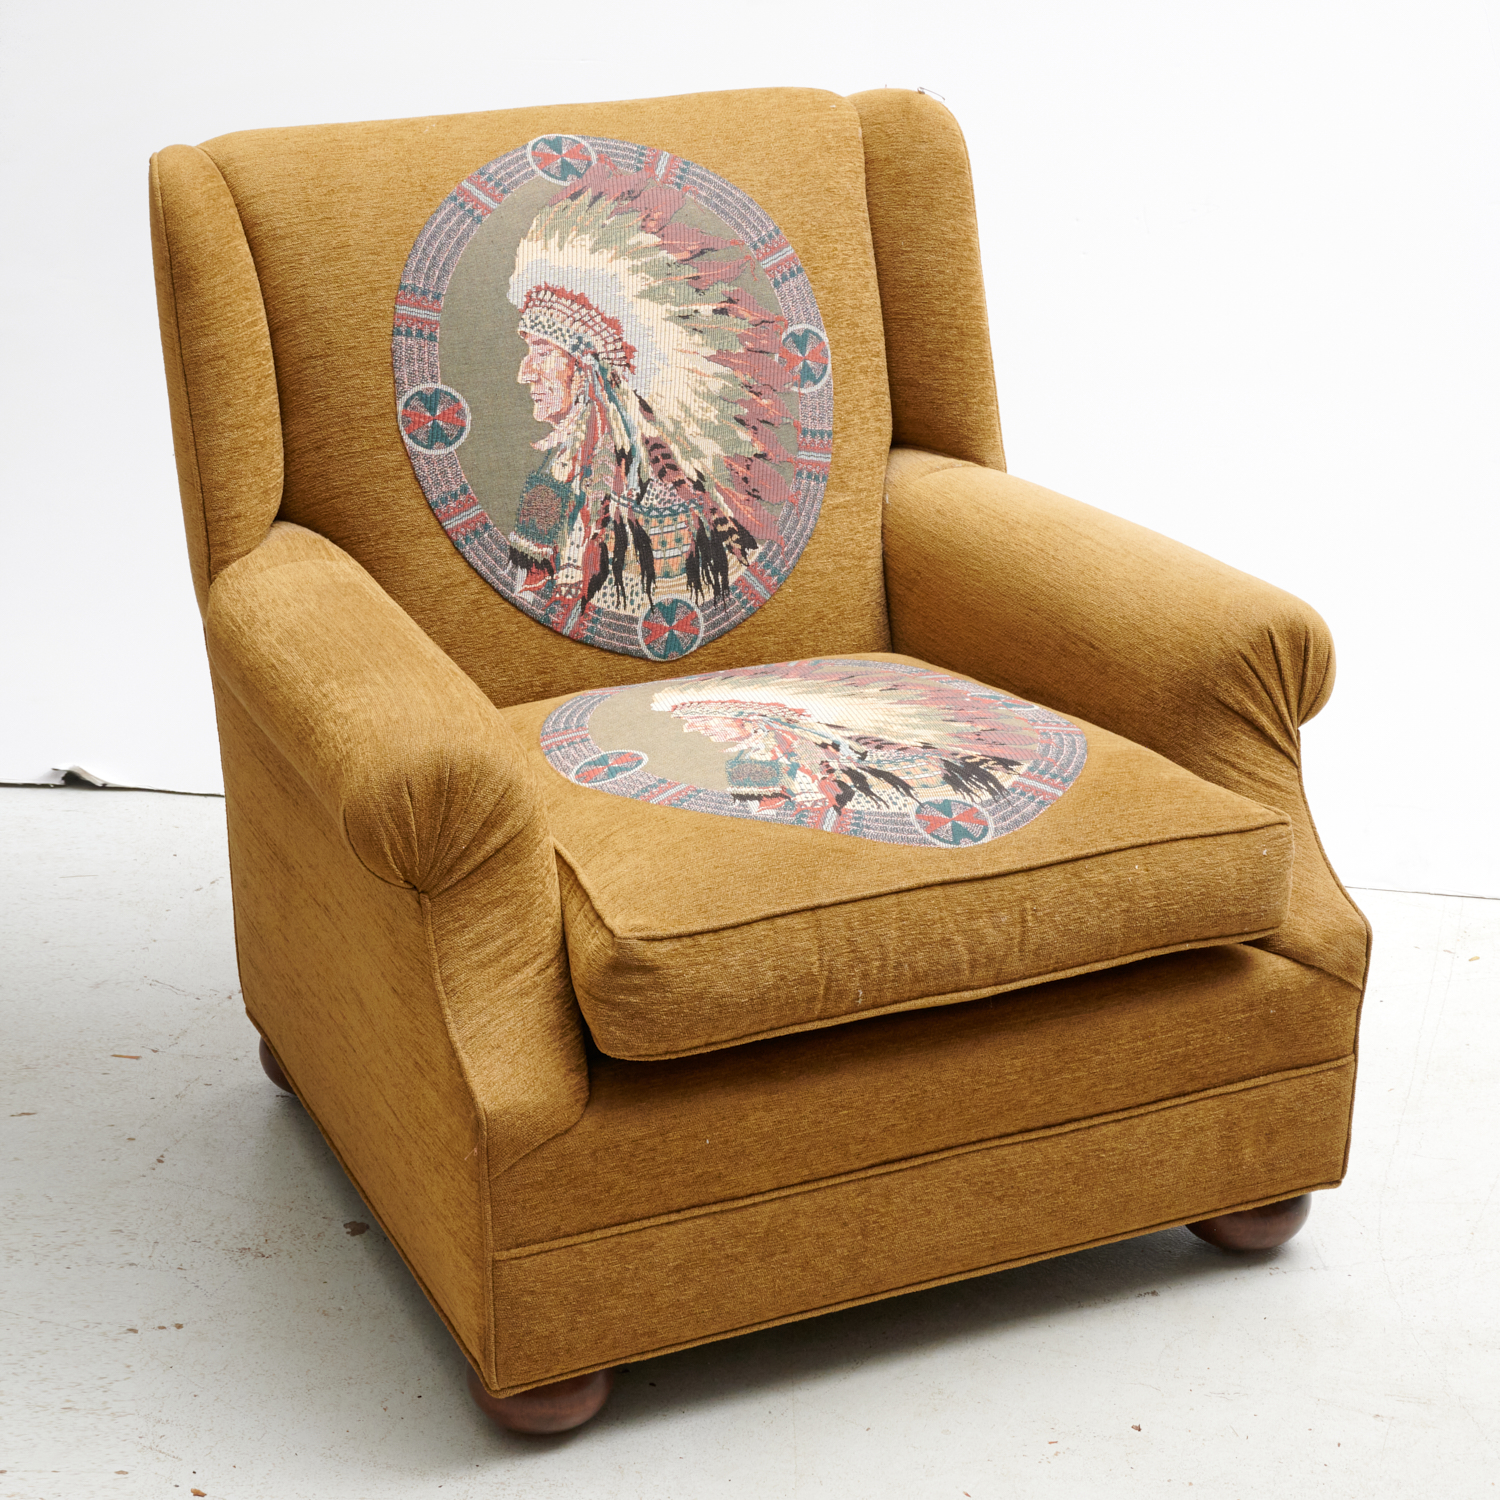 NATIVE AMERICAN CHIEF UPHOLSTERED 2ce63c